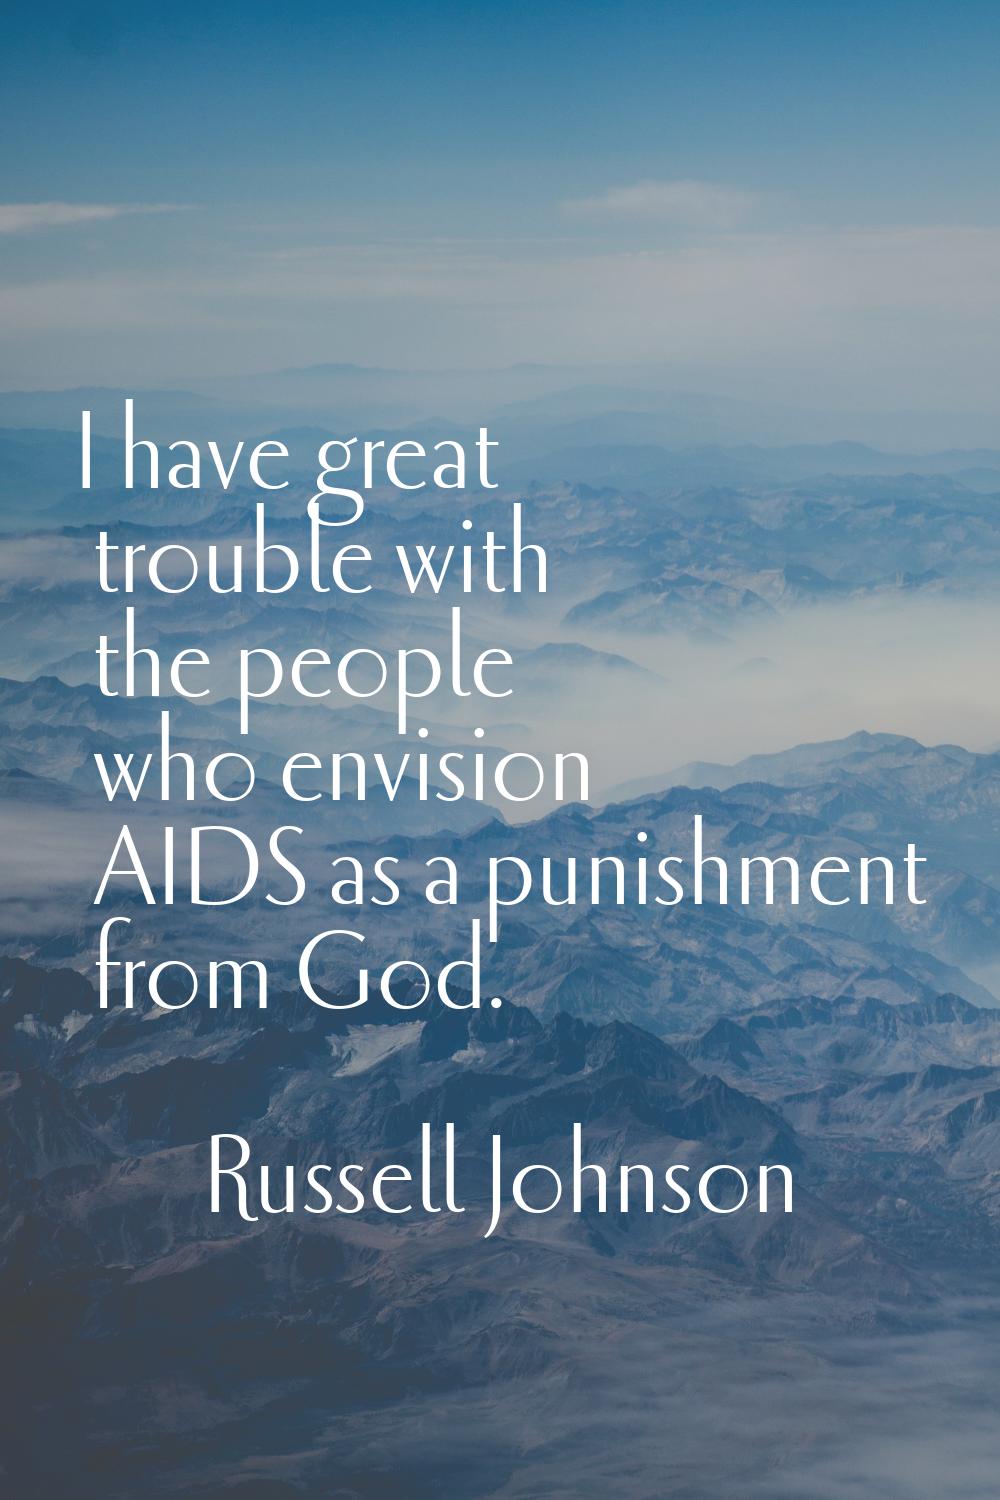 I have great trouble with the people who envision AIDS as a punishment from God.